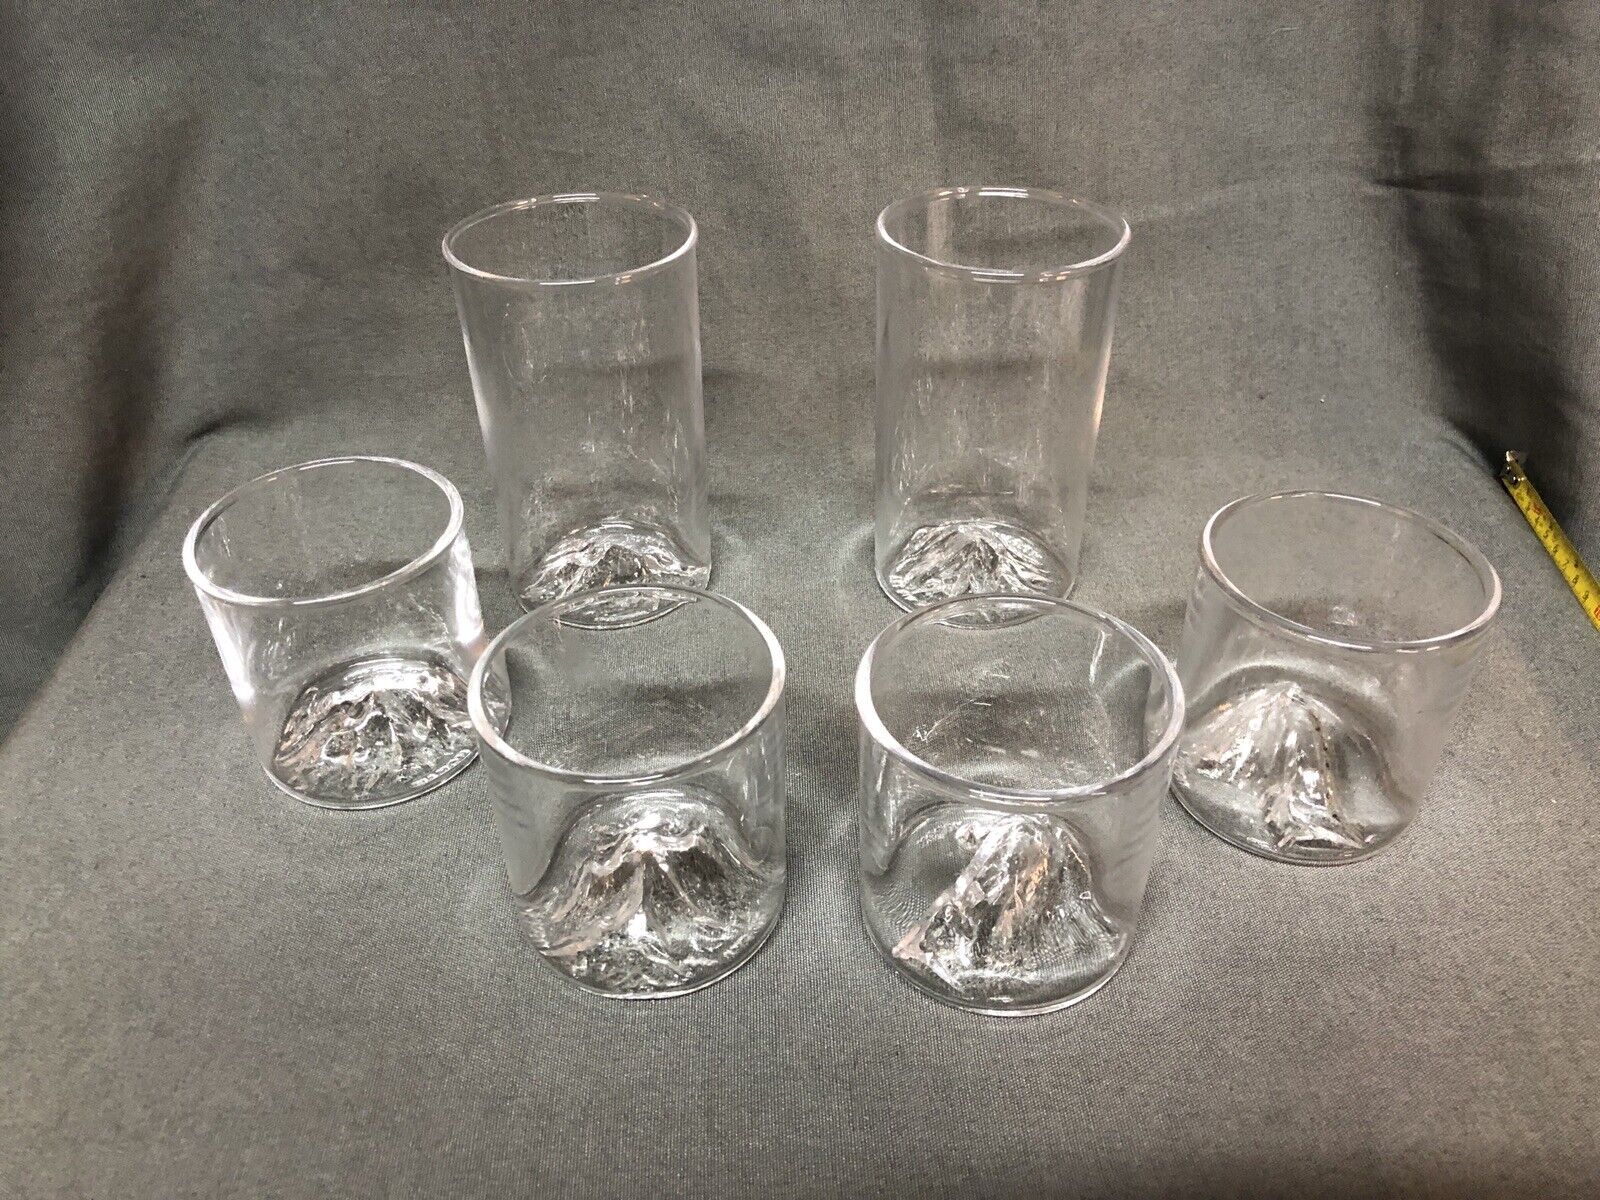 North Drinkware Moutain set of 6 glasses